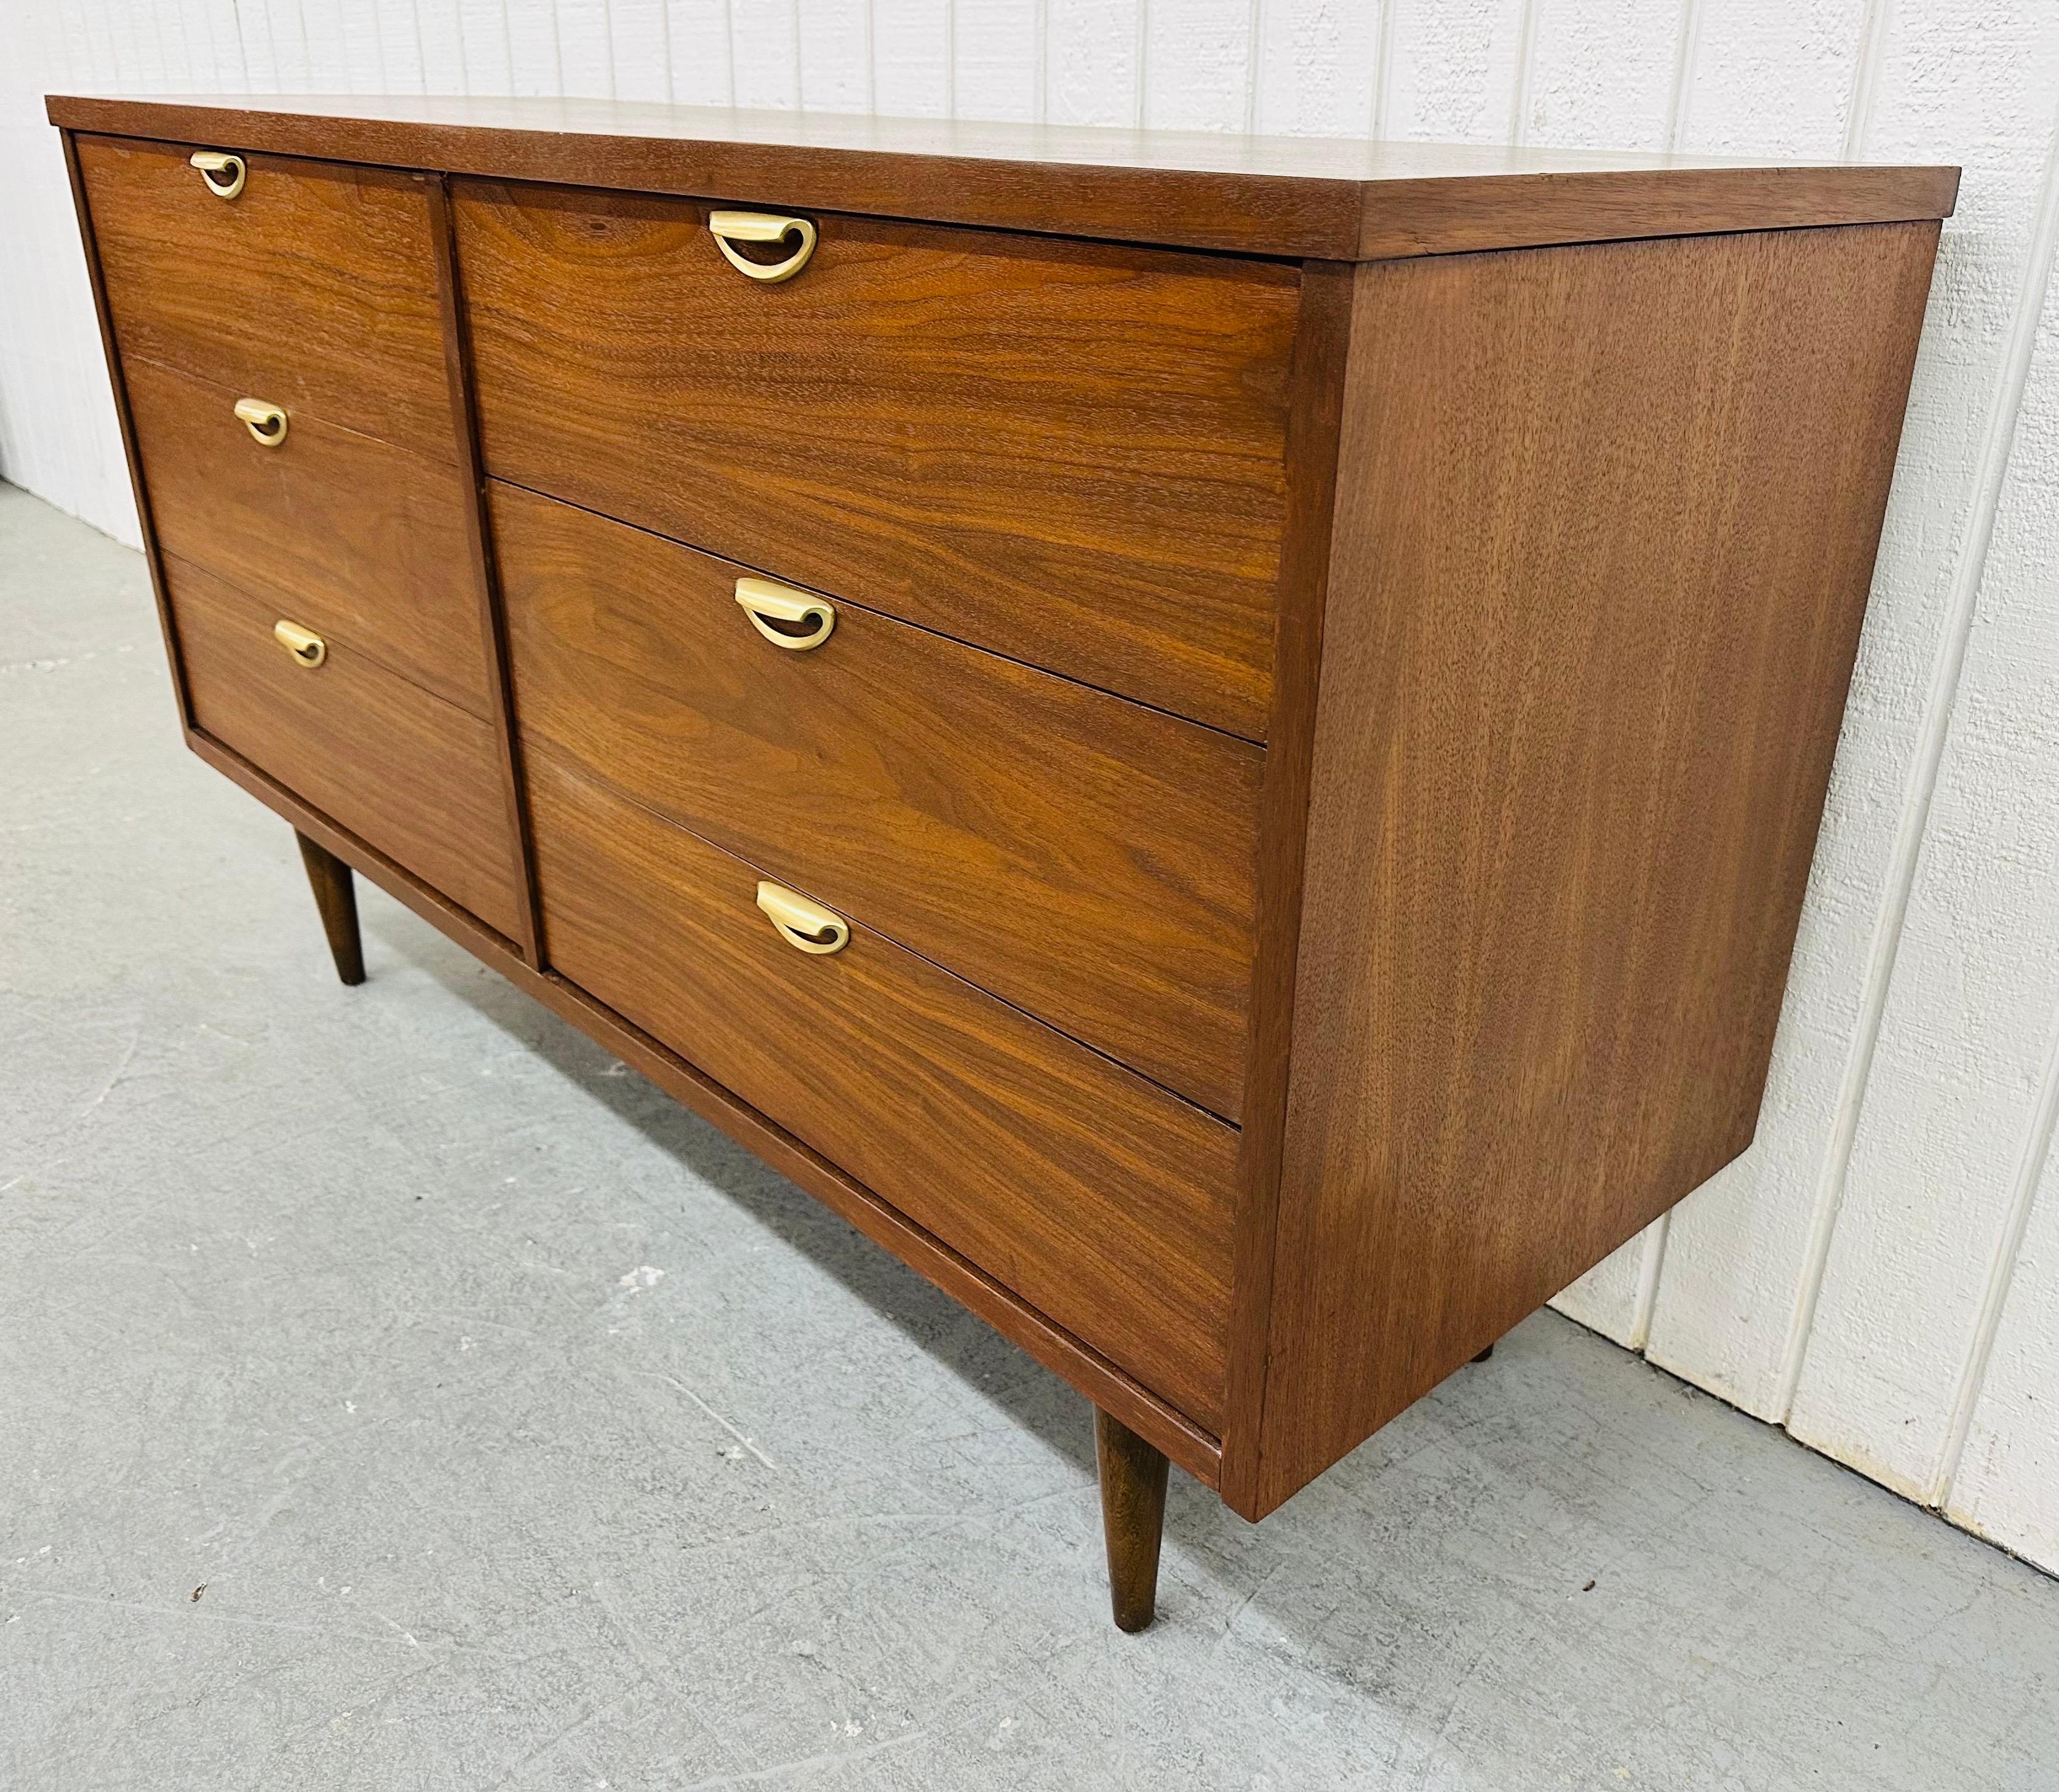 This listing is for a Mid-Century Modern Walnut Dresser. Featuring a straight line design, six large drawers for storage, original brass pulls, modern legs, and a beautiful walnut finish. This is an exceptional combination of quality and design!